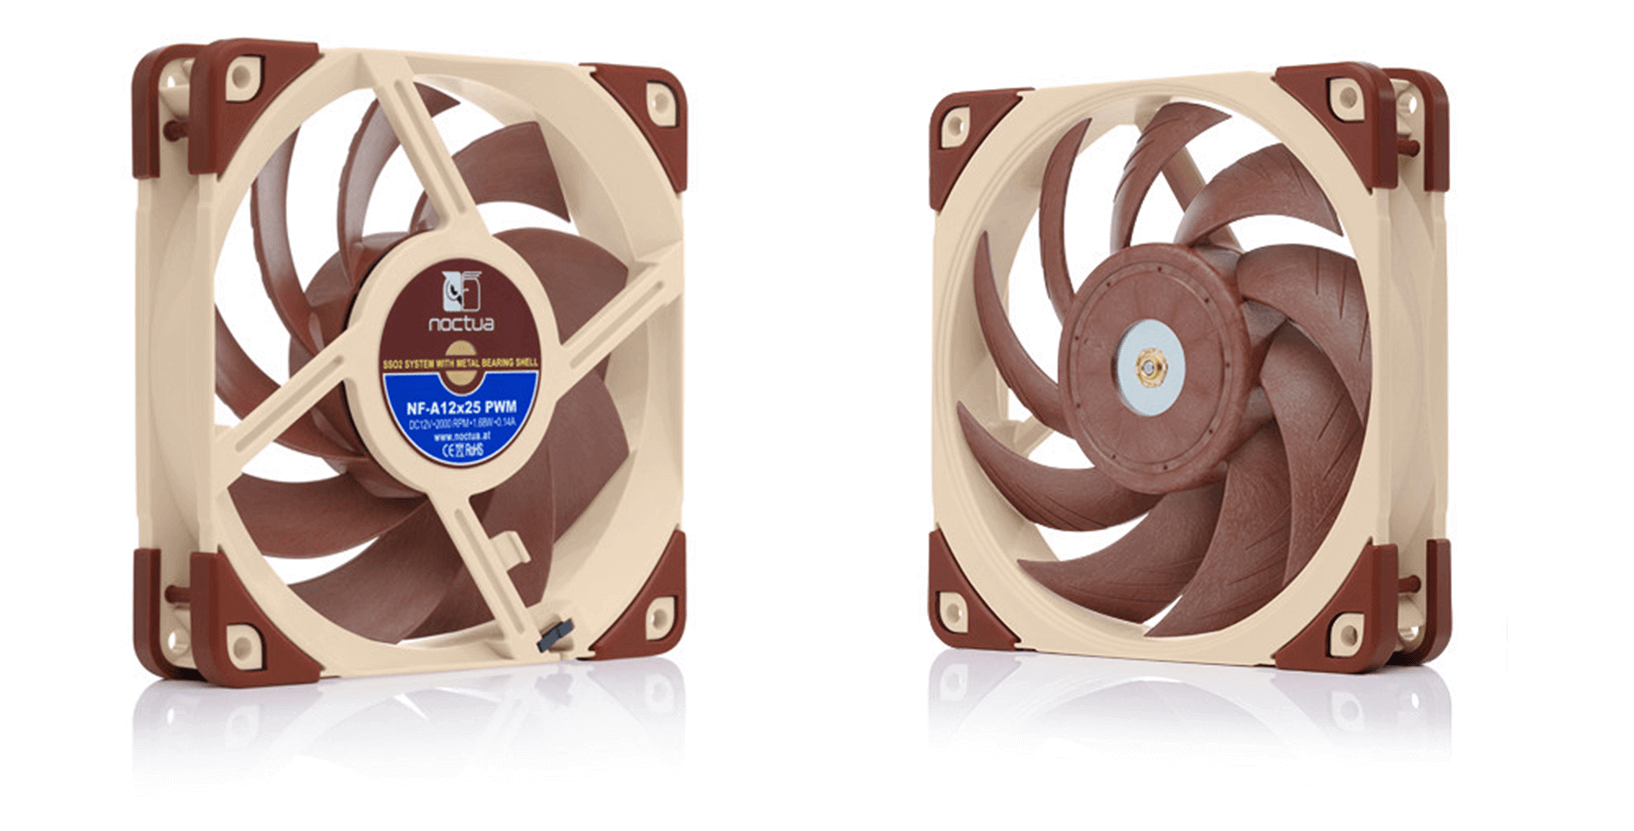 Noctua introduces A-series fans with extremely tight tolerances